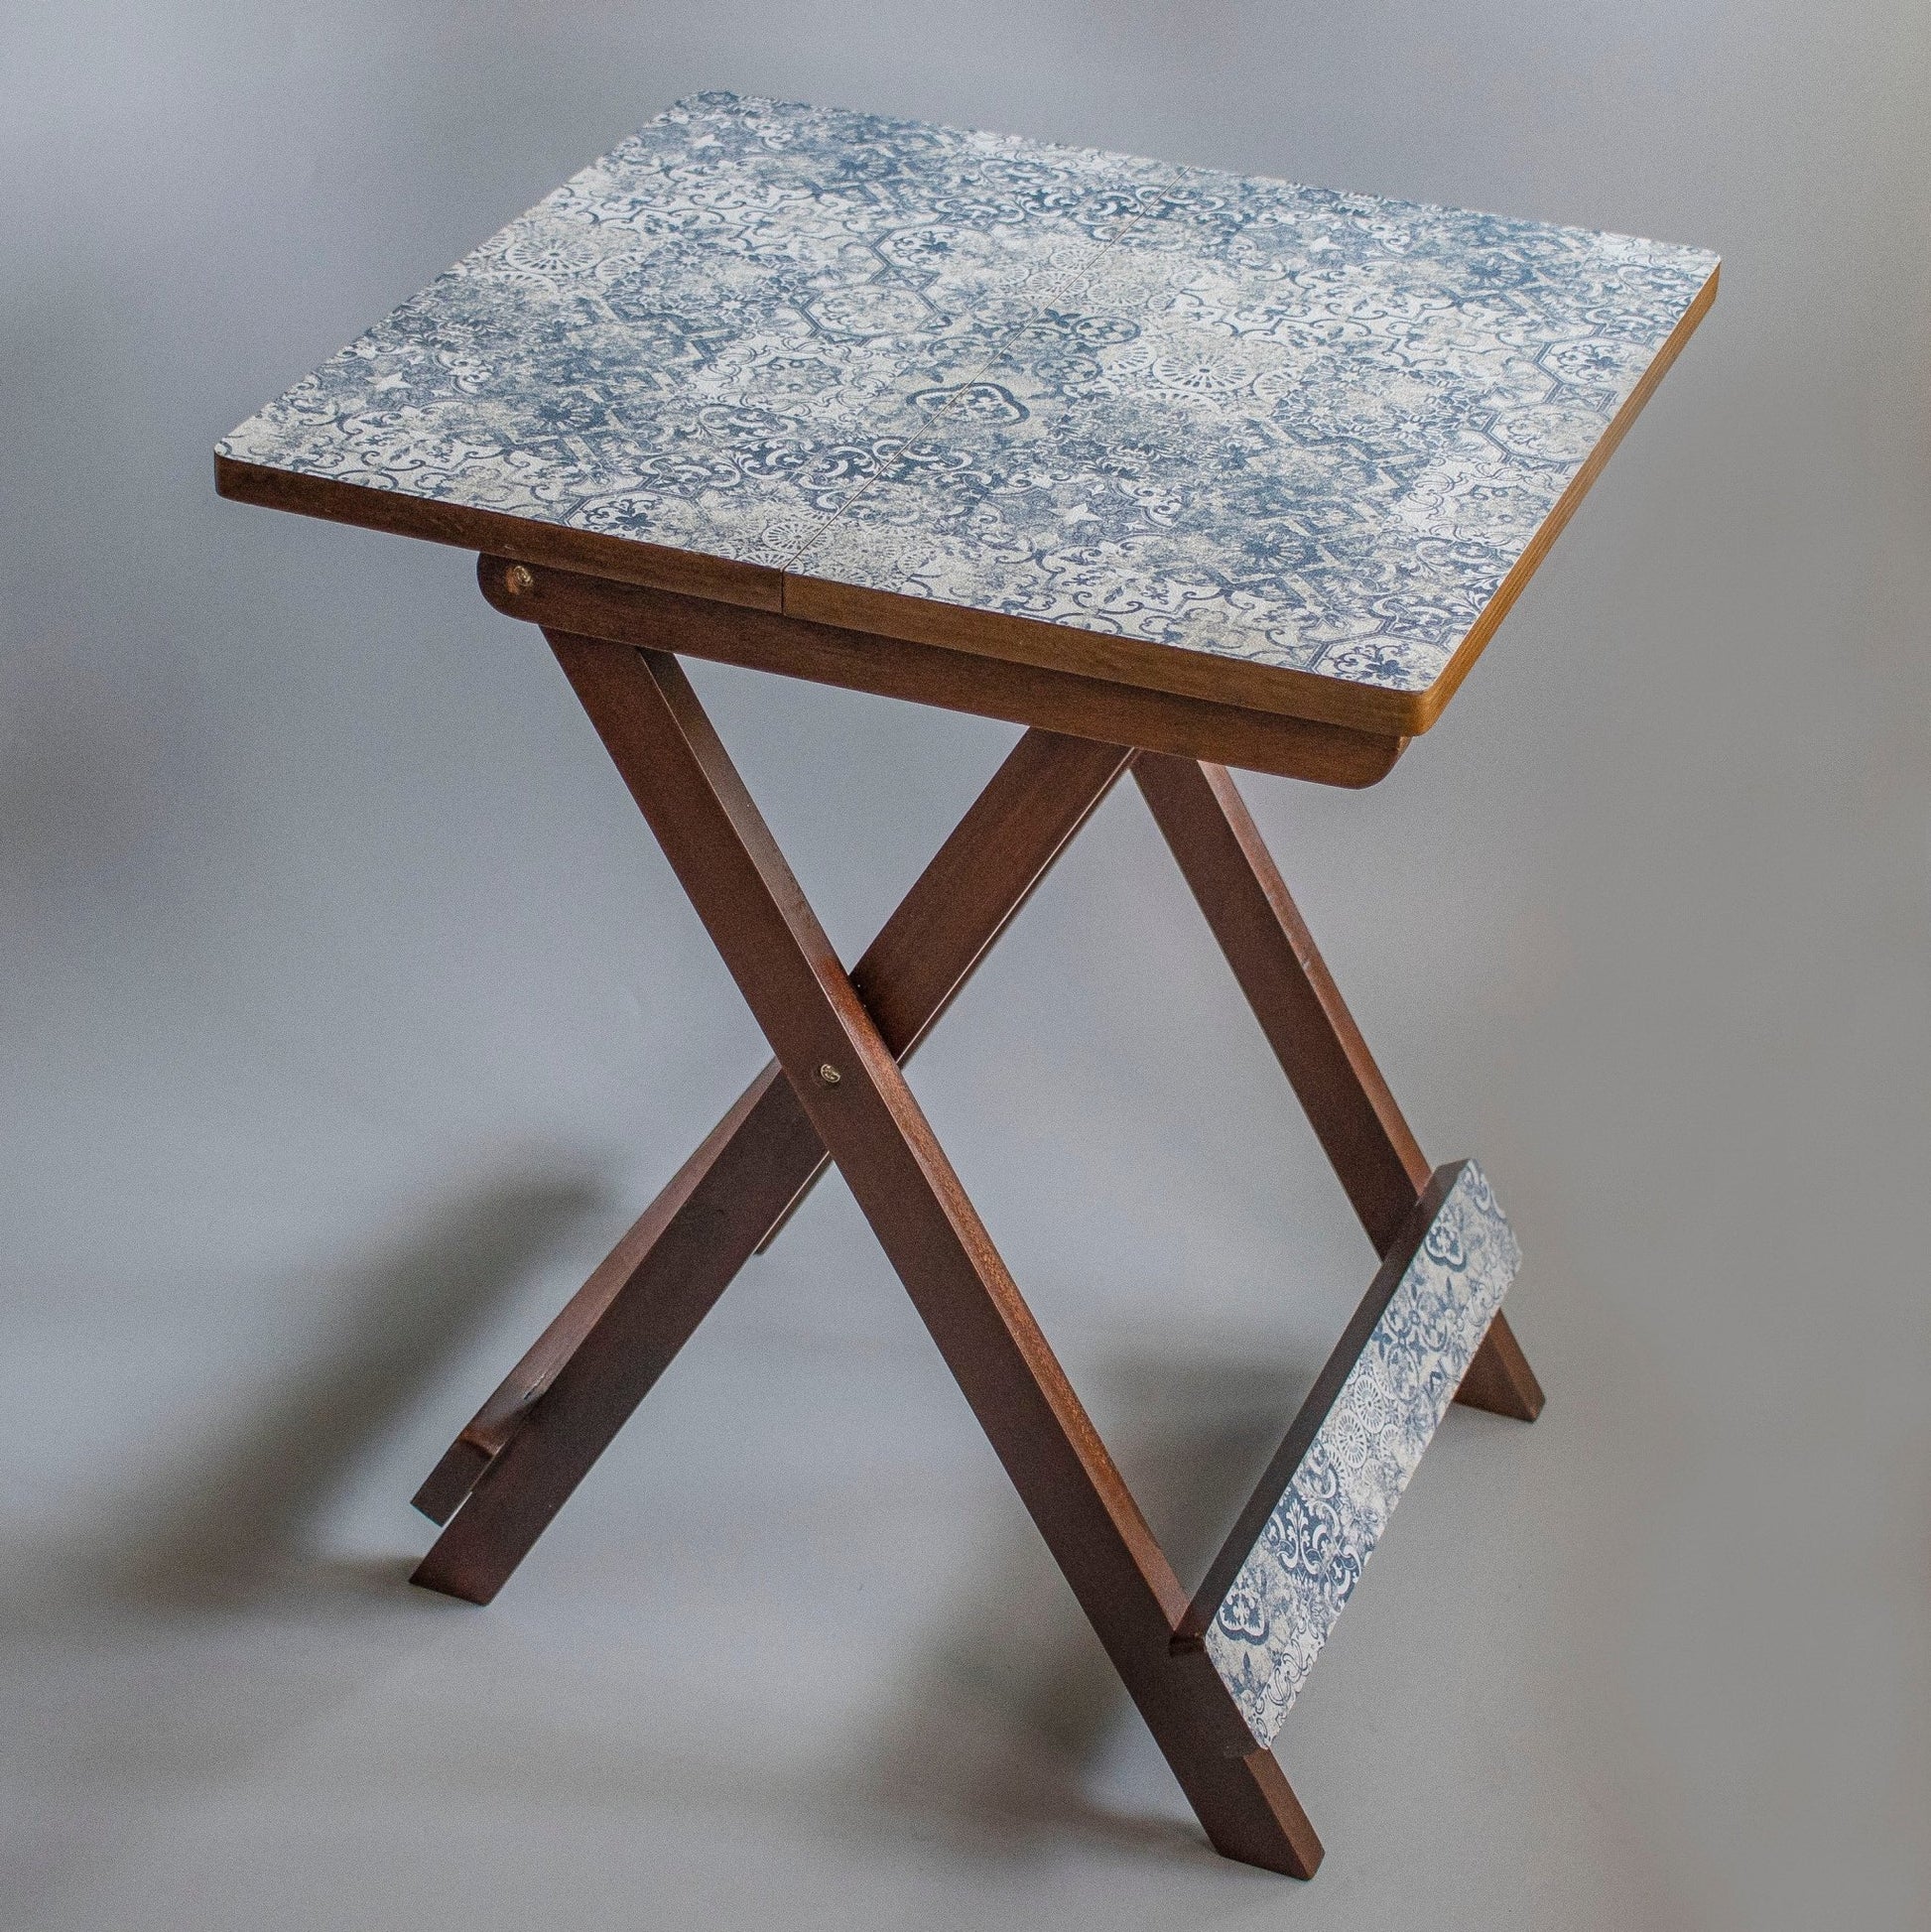 Shahi : Textured Foldable Tables - Ebony WoodcraftsFolding Tables, Side Tables, End Table